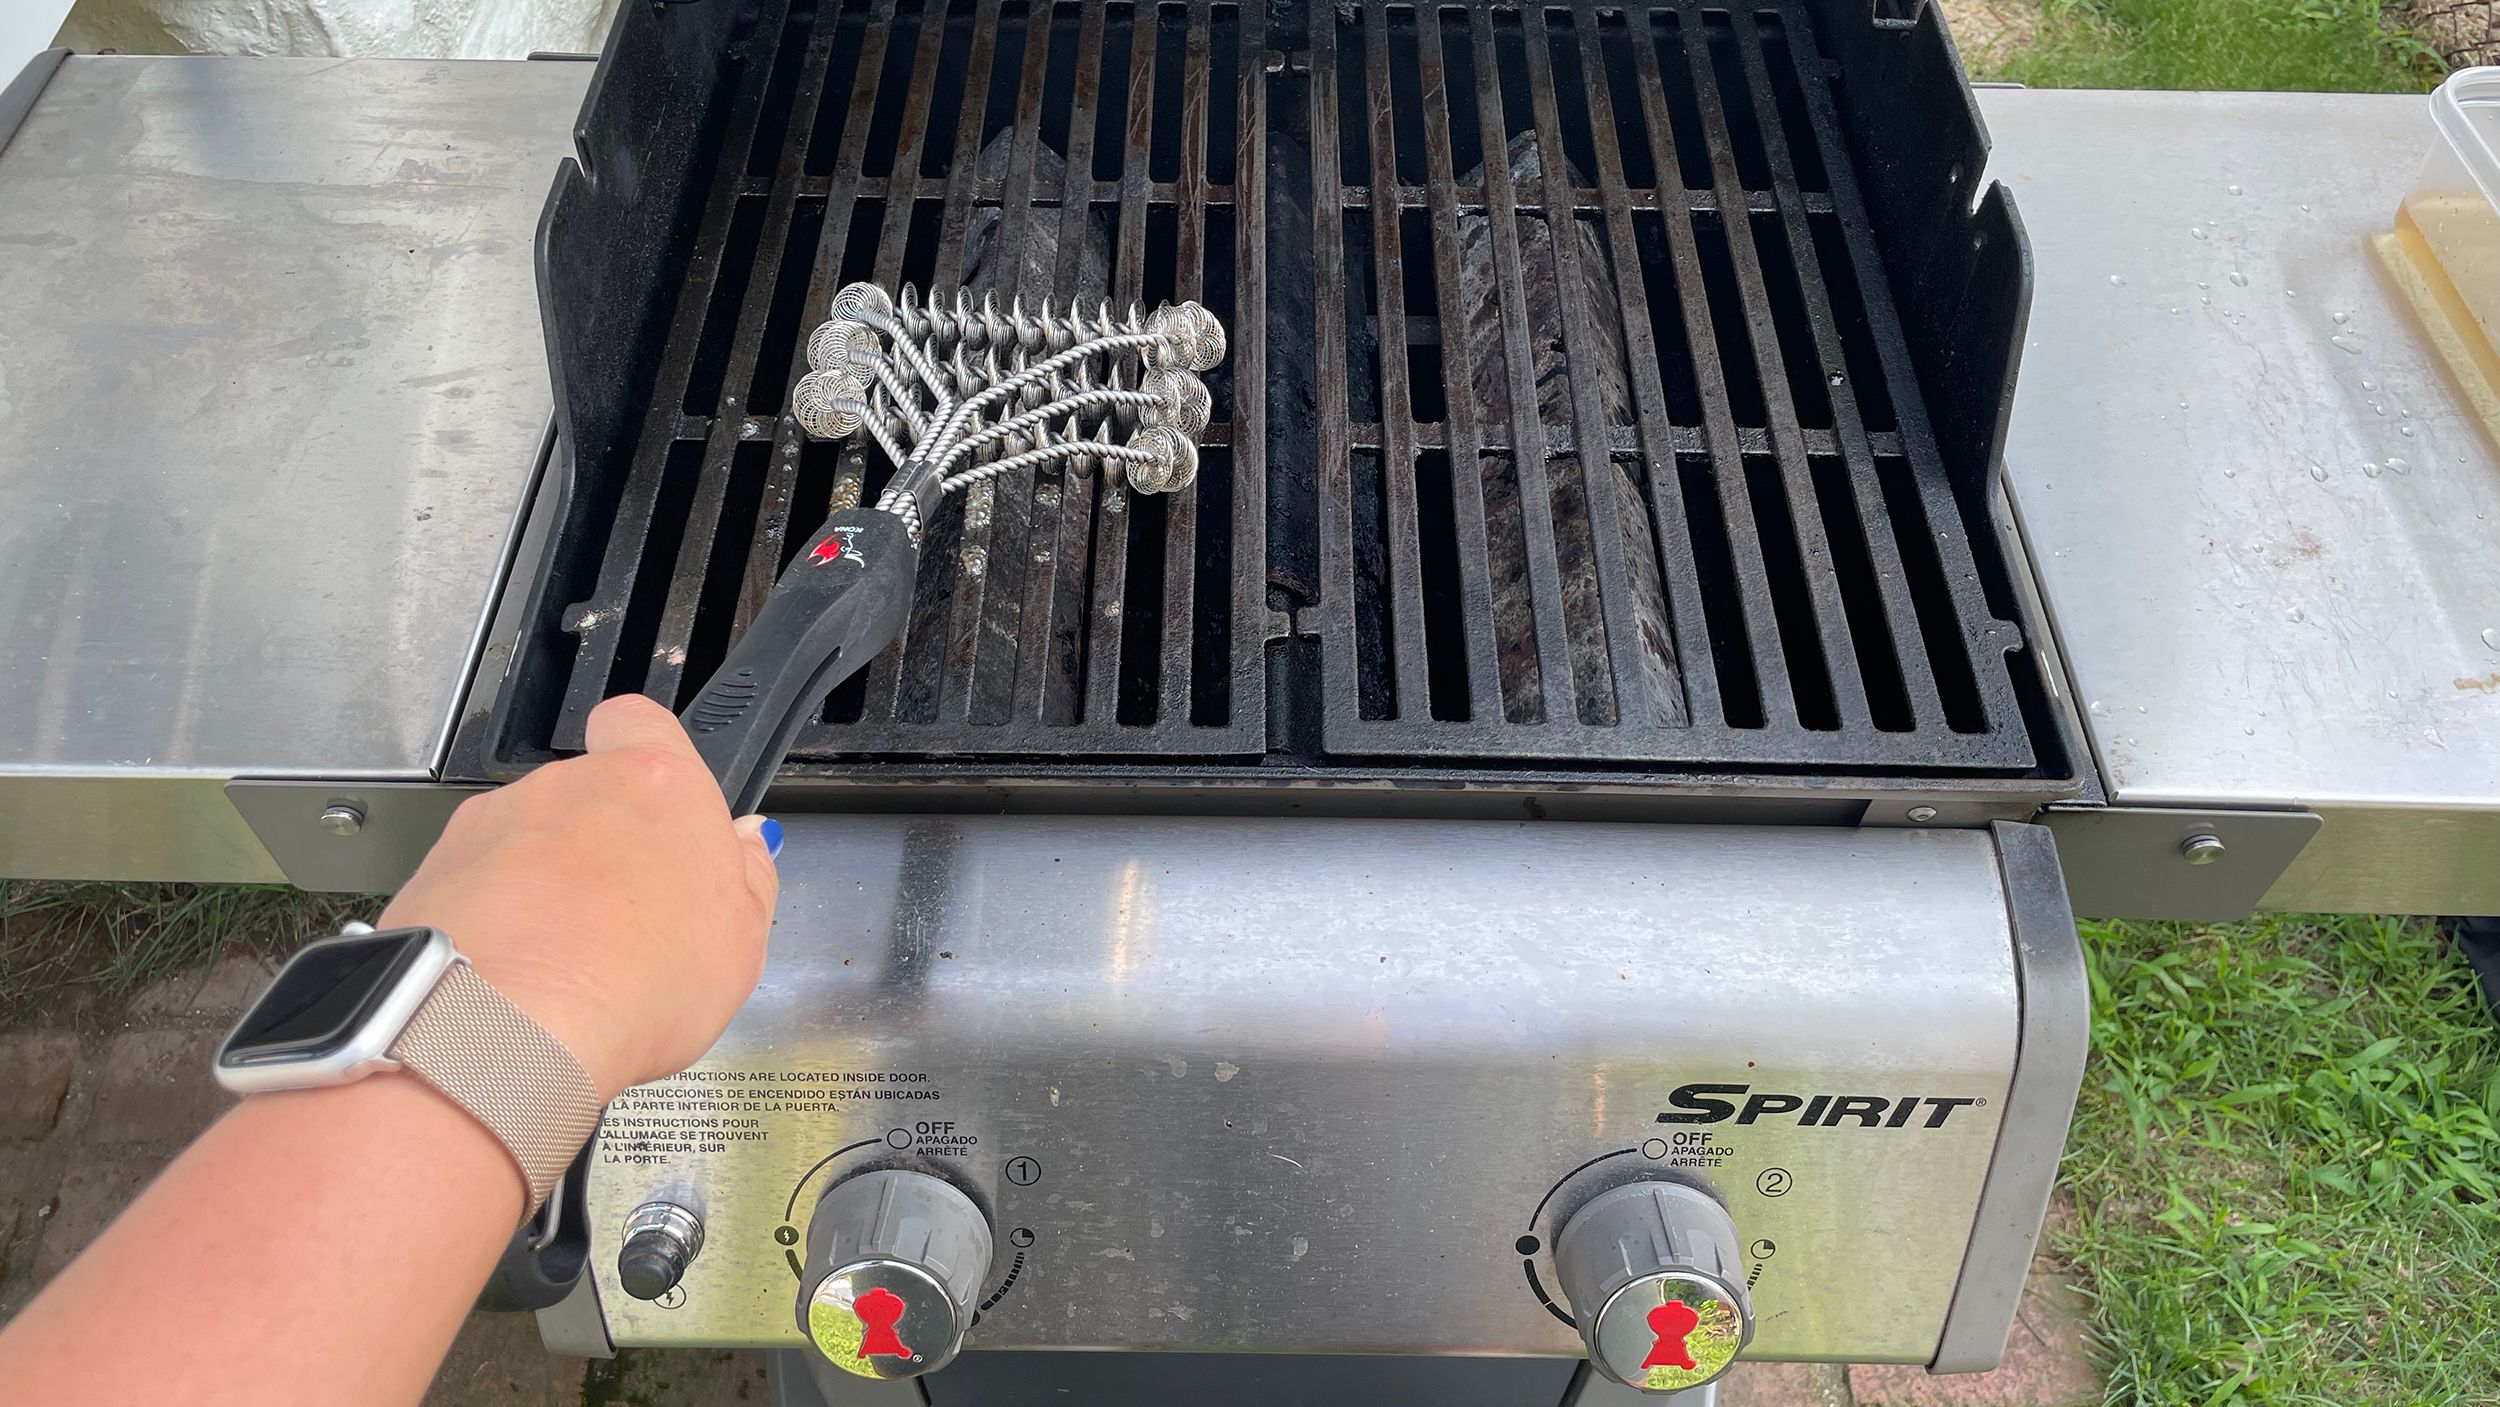 III. Factors to Consider when Choosing a Grill Brush